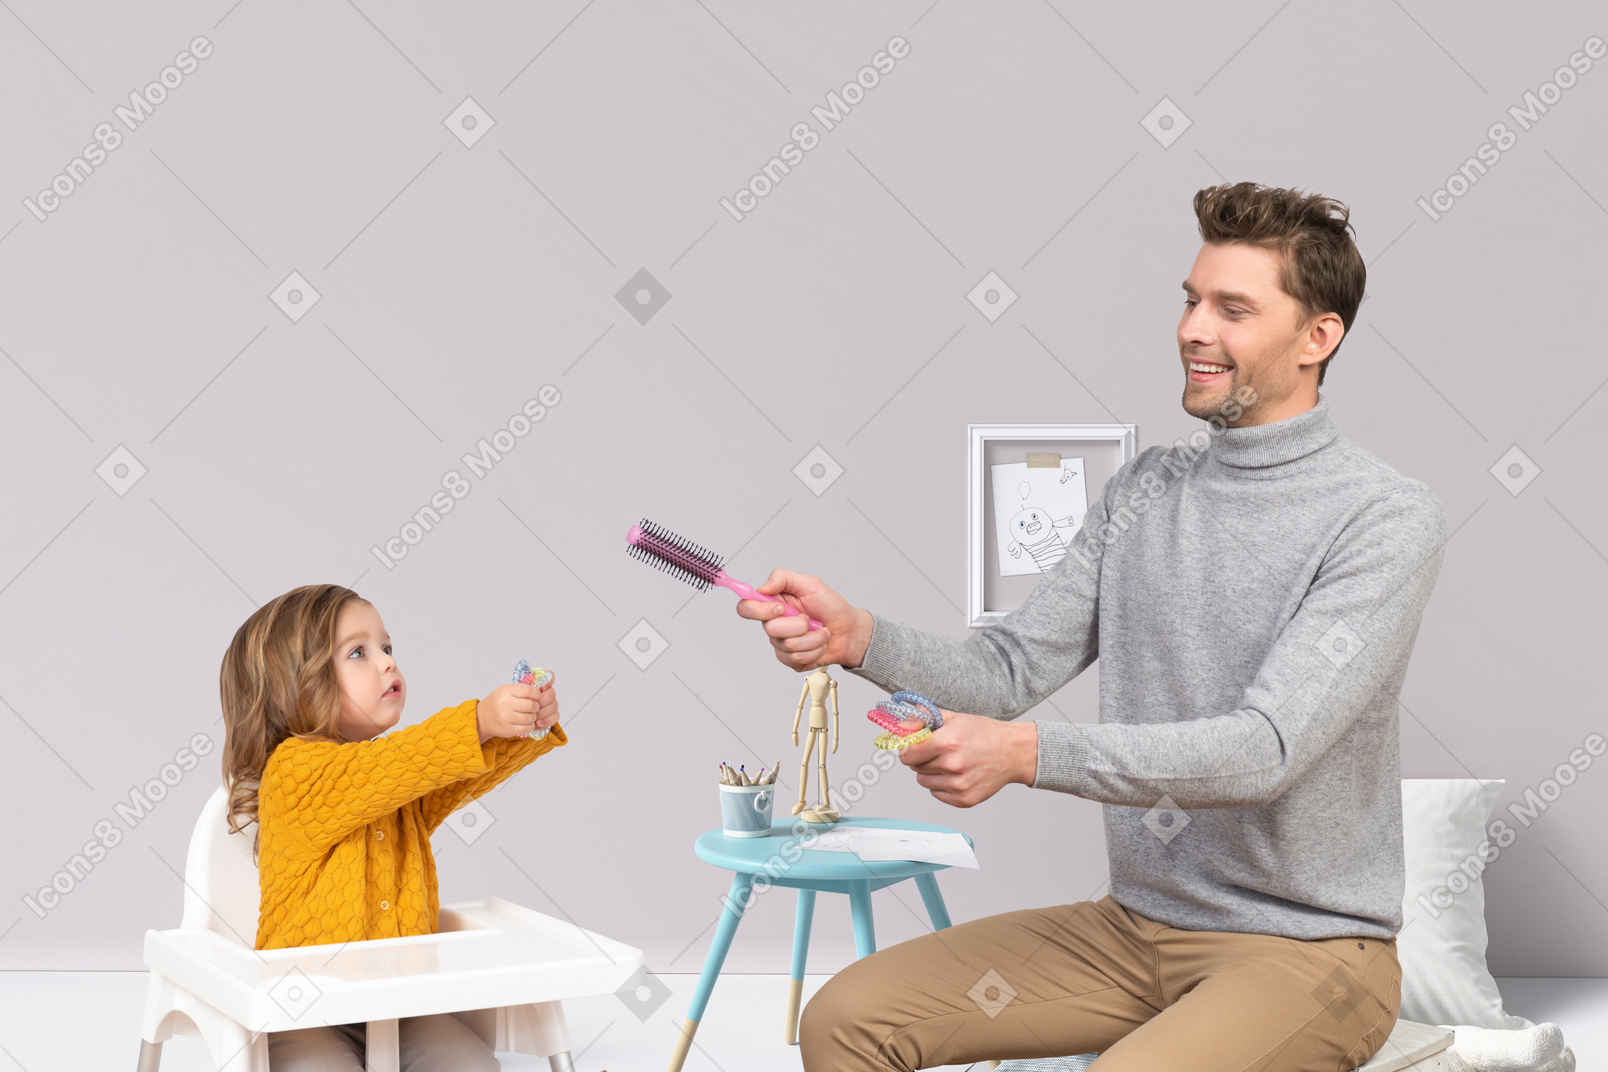 A little girl sitting in a high chair while a man combs her hair